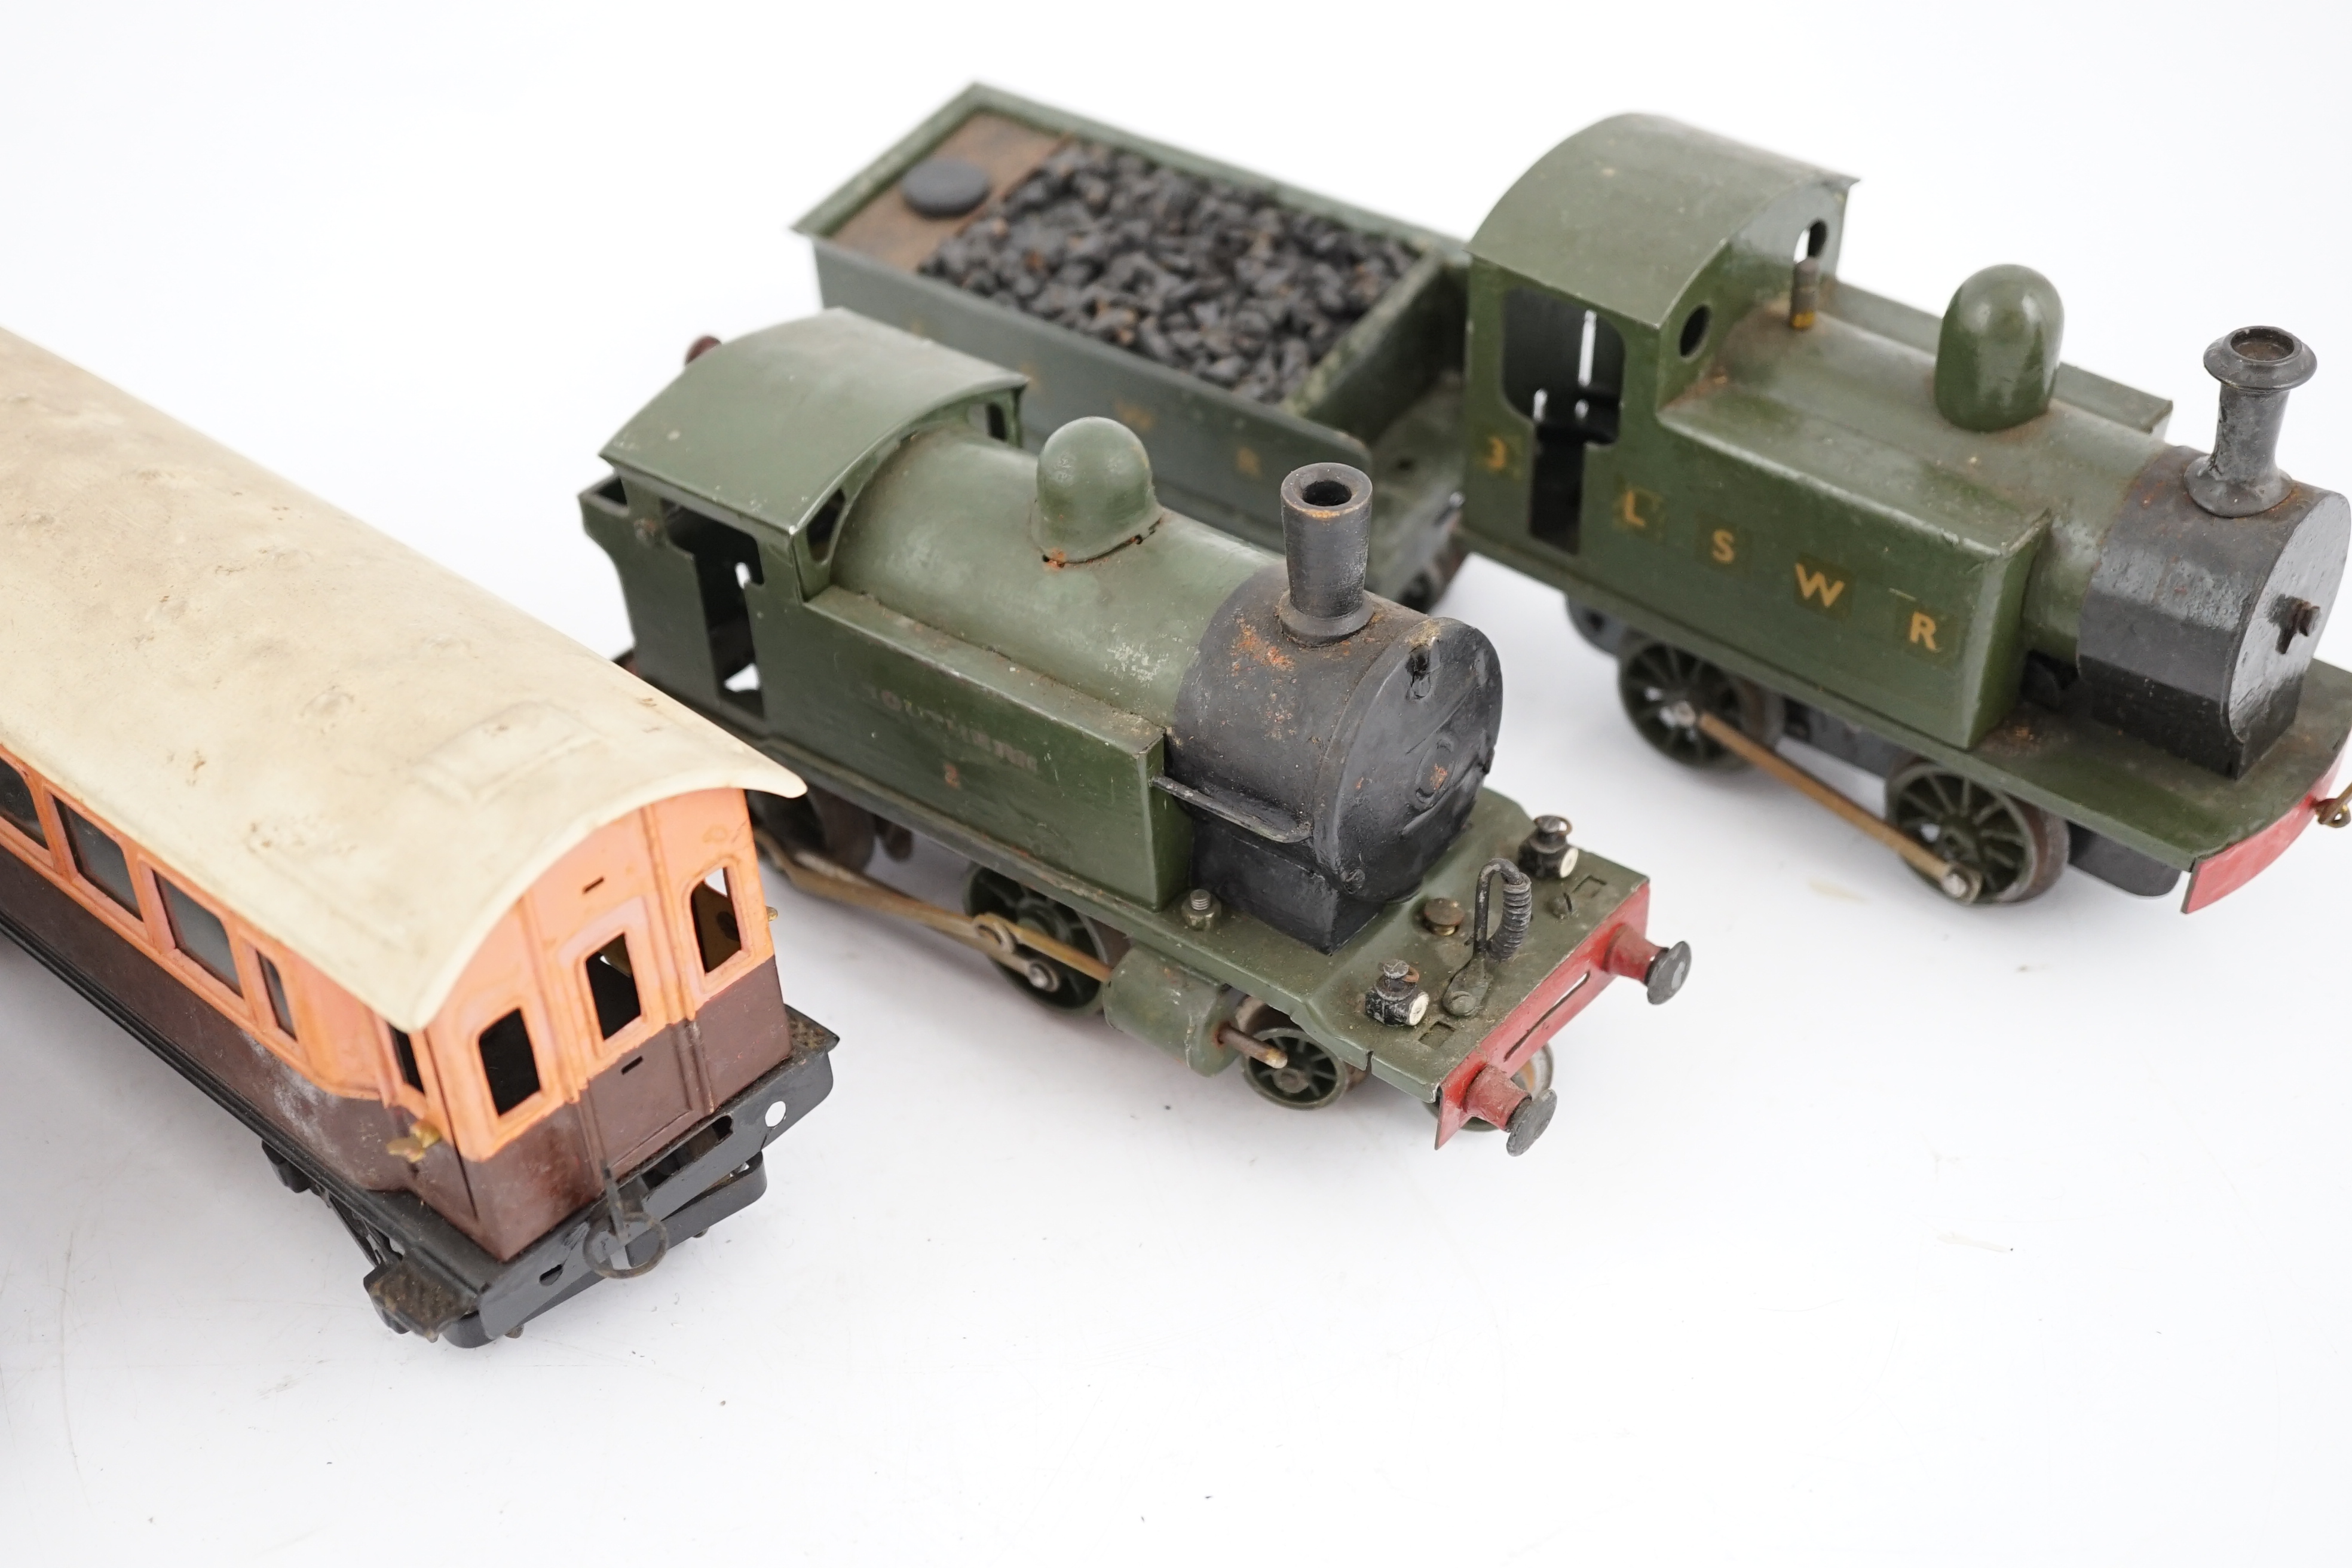 Fifteen tinplate 0 gauge railway items, including three clockwork locomotives; an LSWR 0-4-2 tender loco, an LSWR 0-4-0T and a SR 4-4-0T, all built using some commercial parts with some elements scratch built